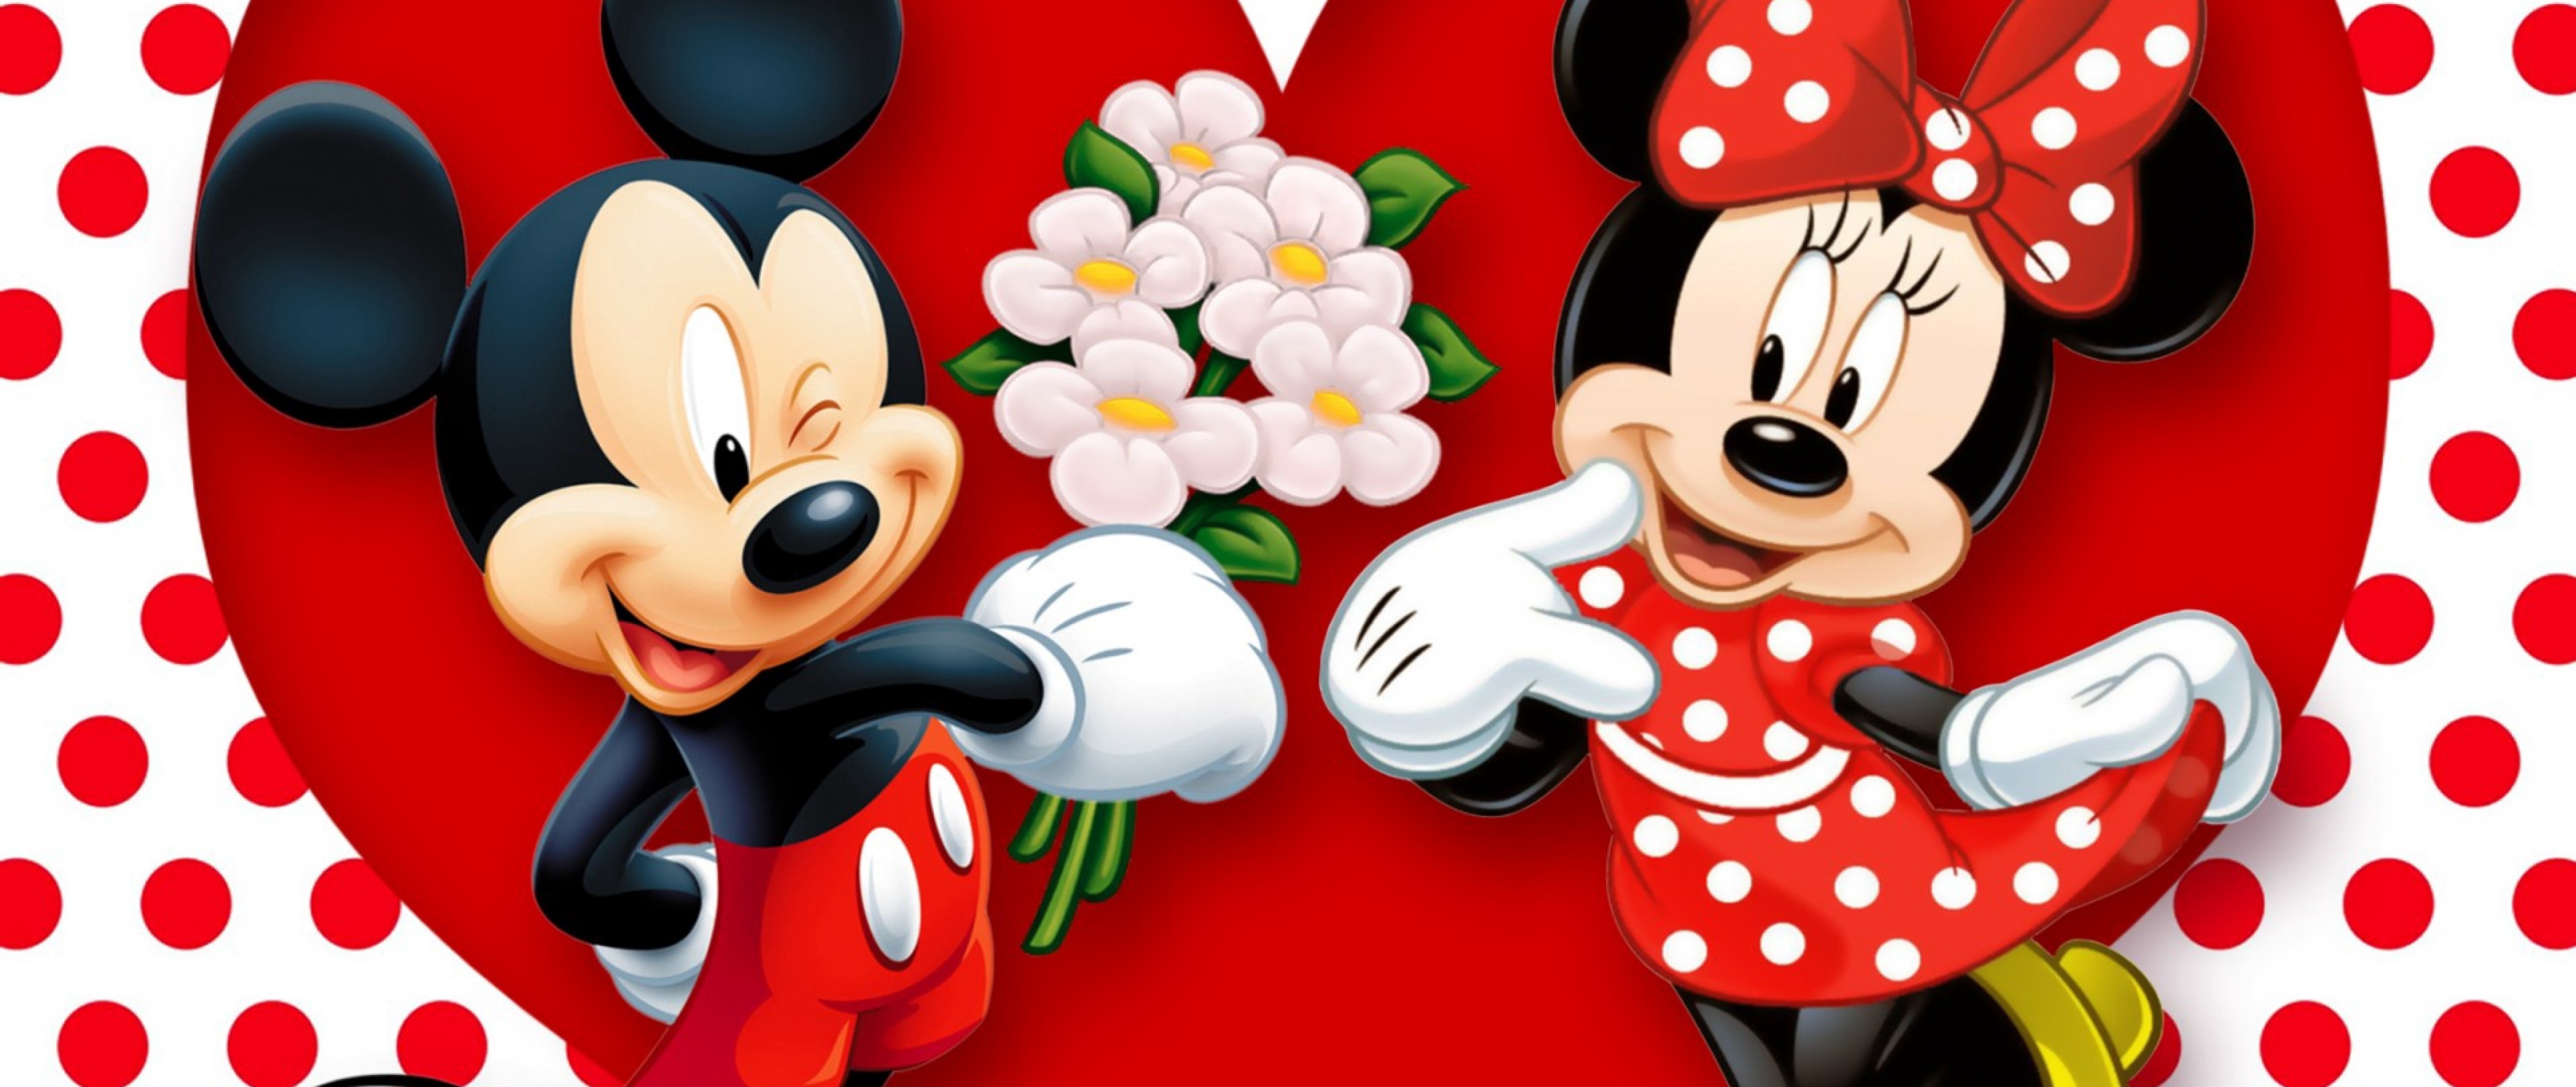 Mickey Mouse Clubhouse HD Wallpaper 4K Ultra HD Wide TV